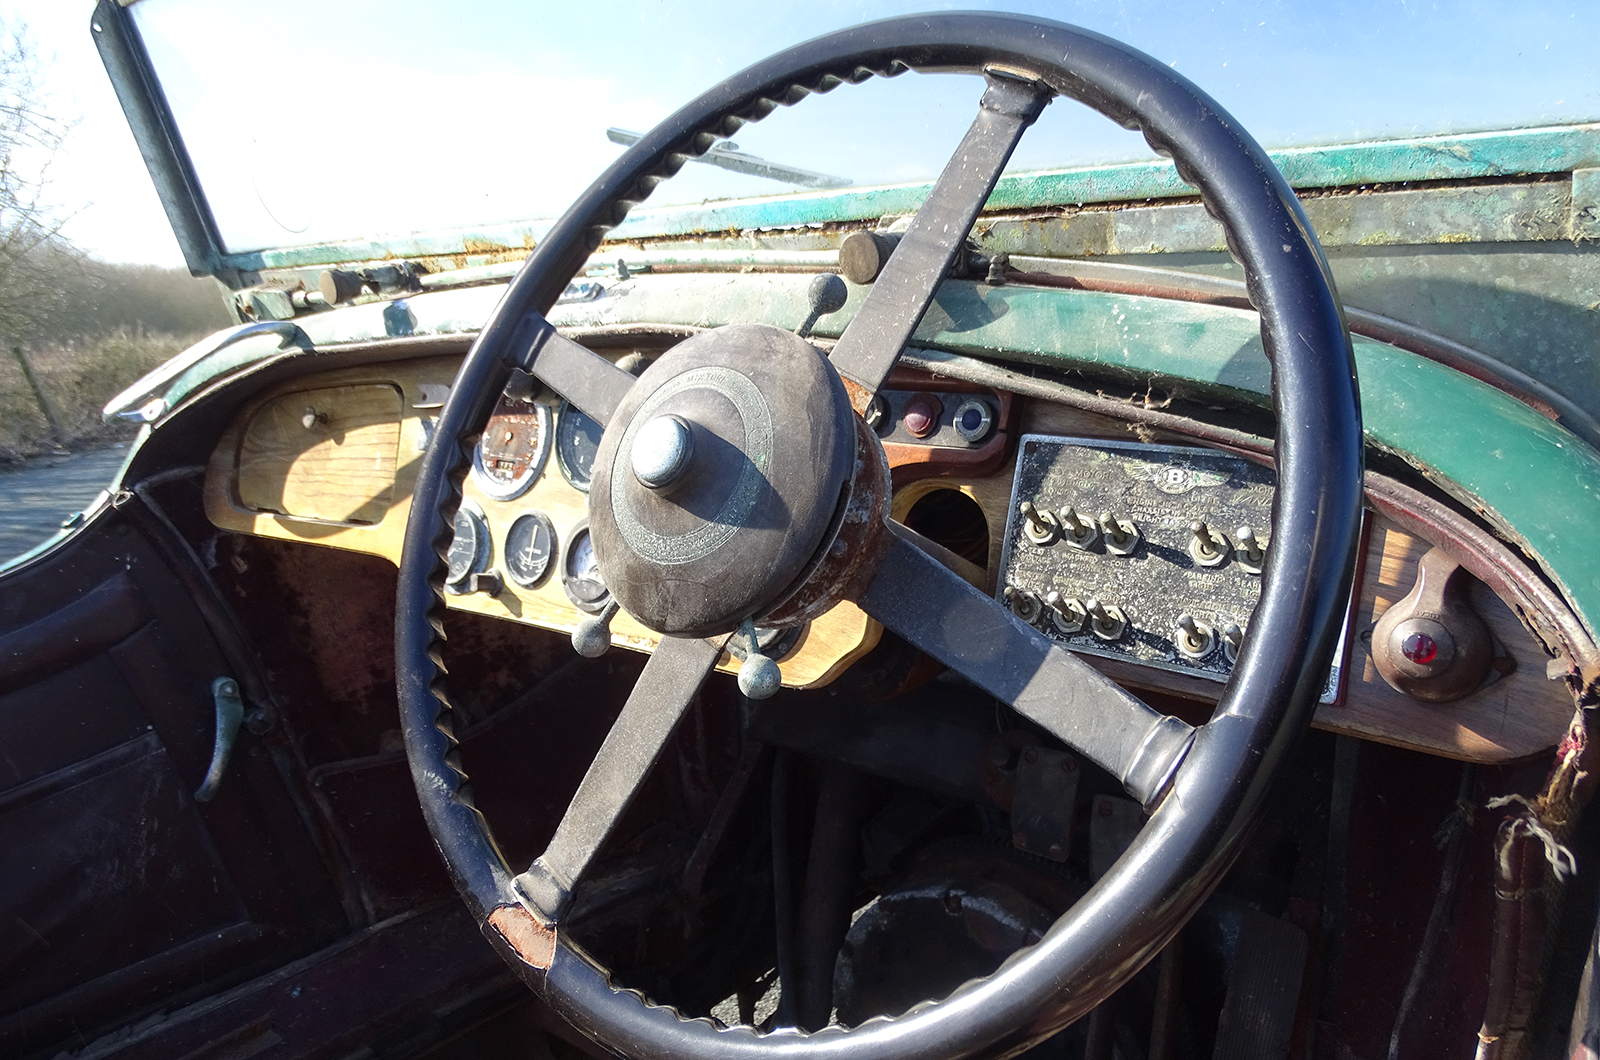 Classic & Sports Car – Unique barn-find Bentley could be the perfect birthday present